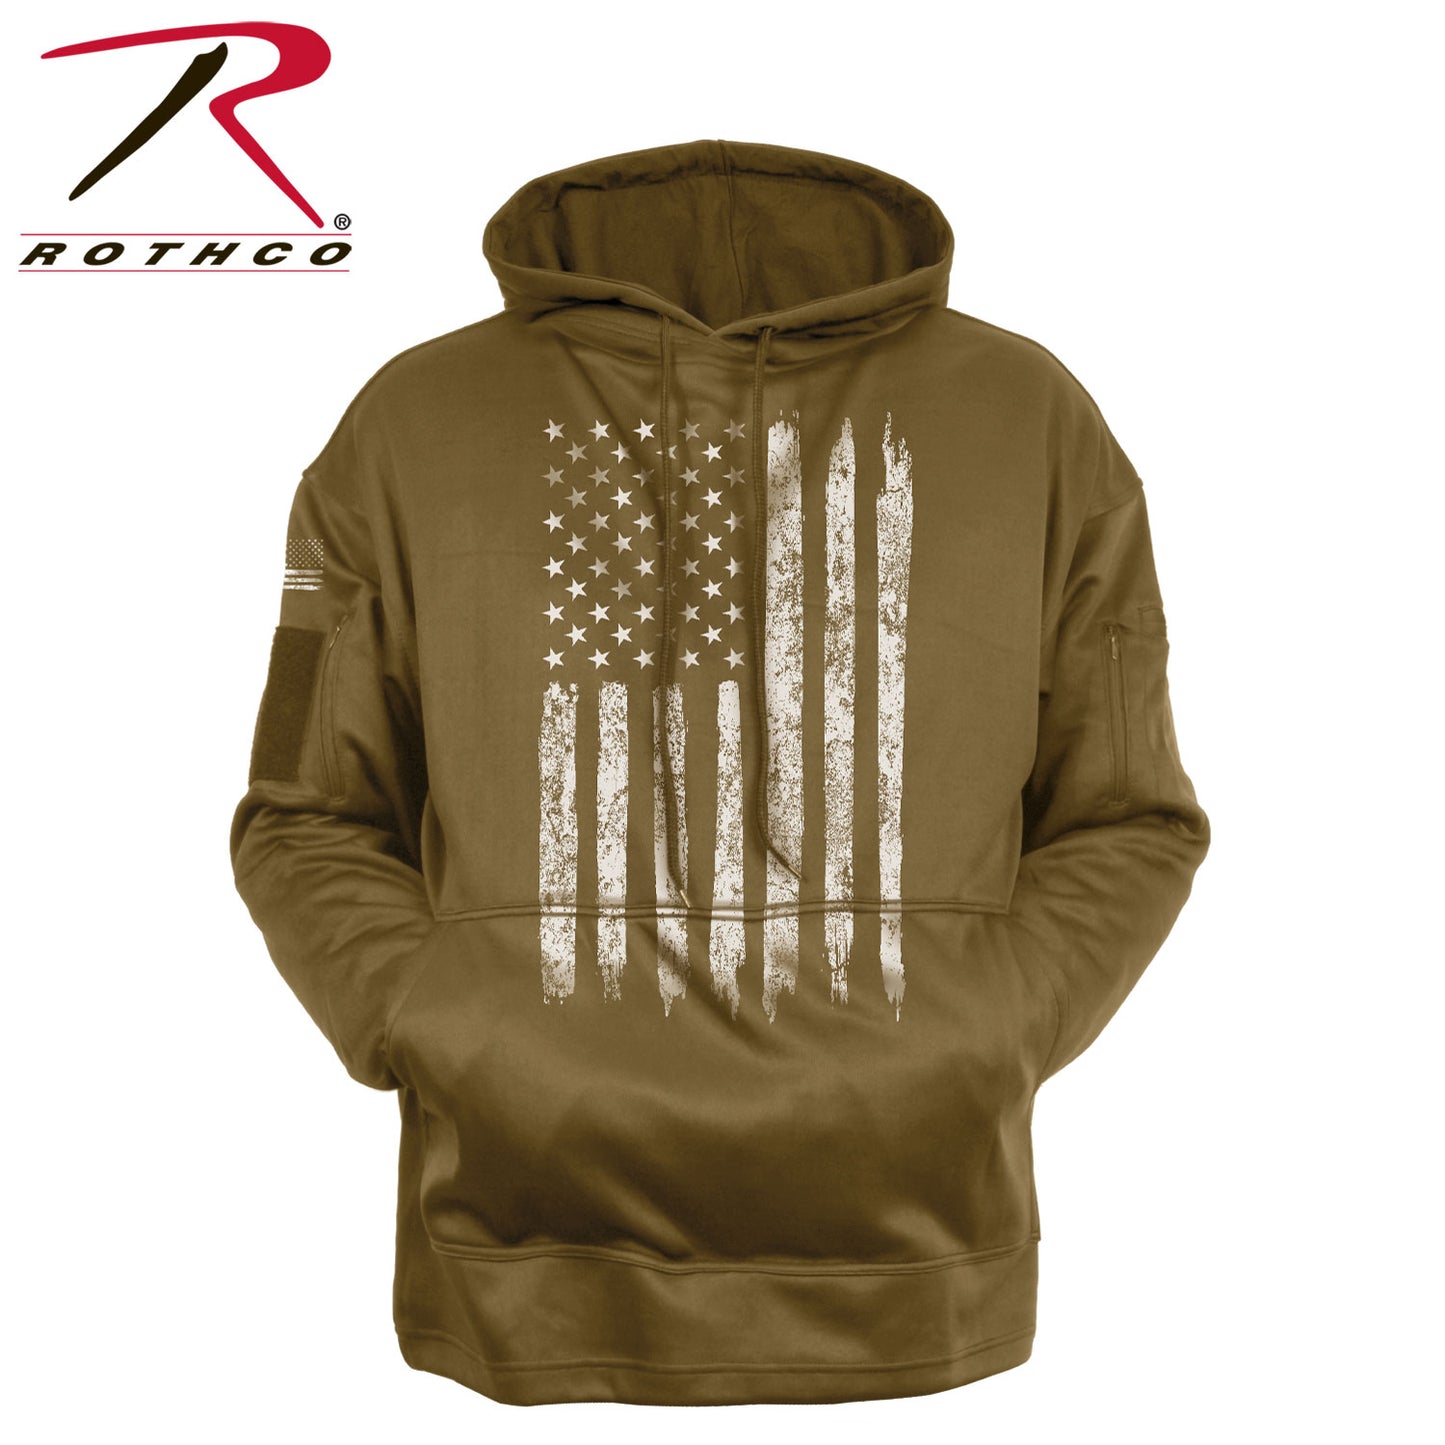 Milspec U.S. Flag Concealed Carry Hoodie Concealed Carry Clothing MilTac Tactical Military Outdoor Gear Australia